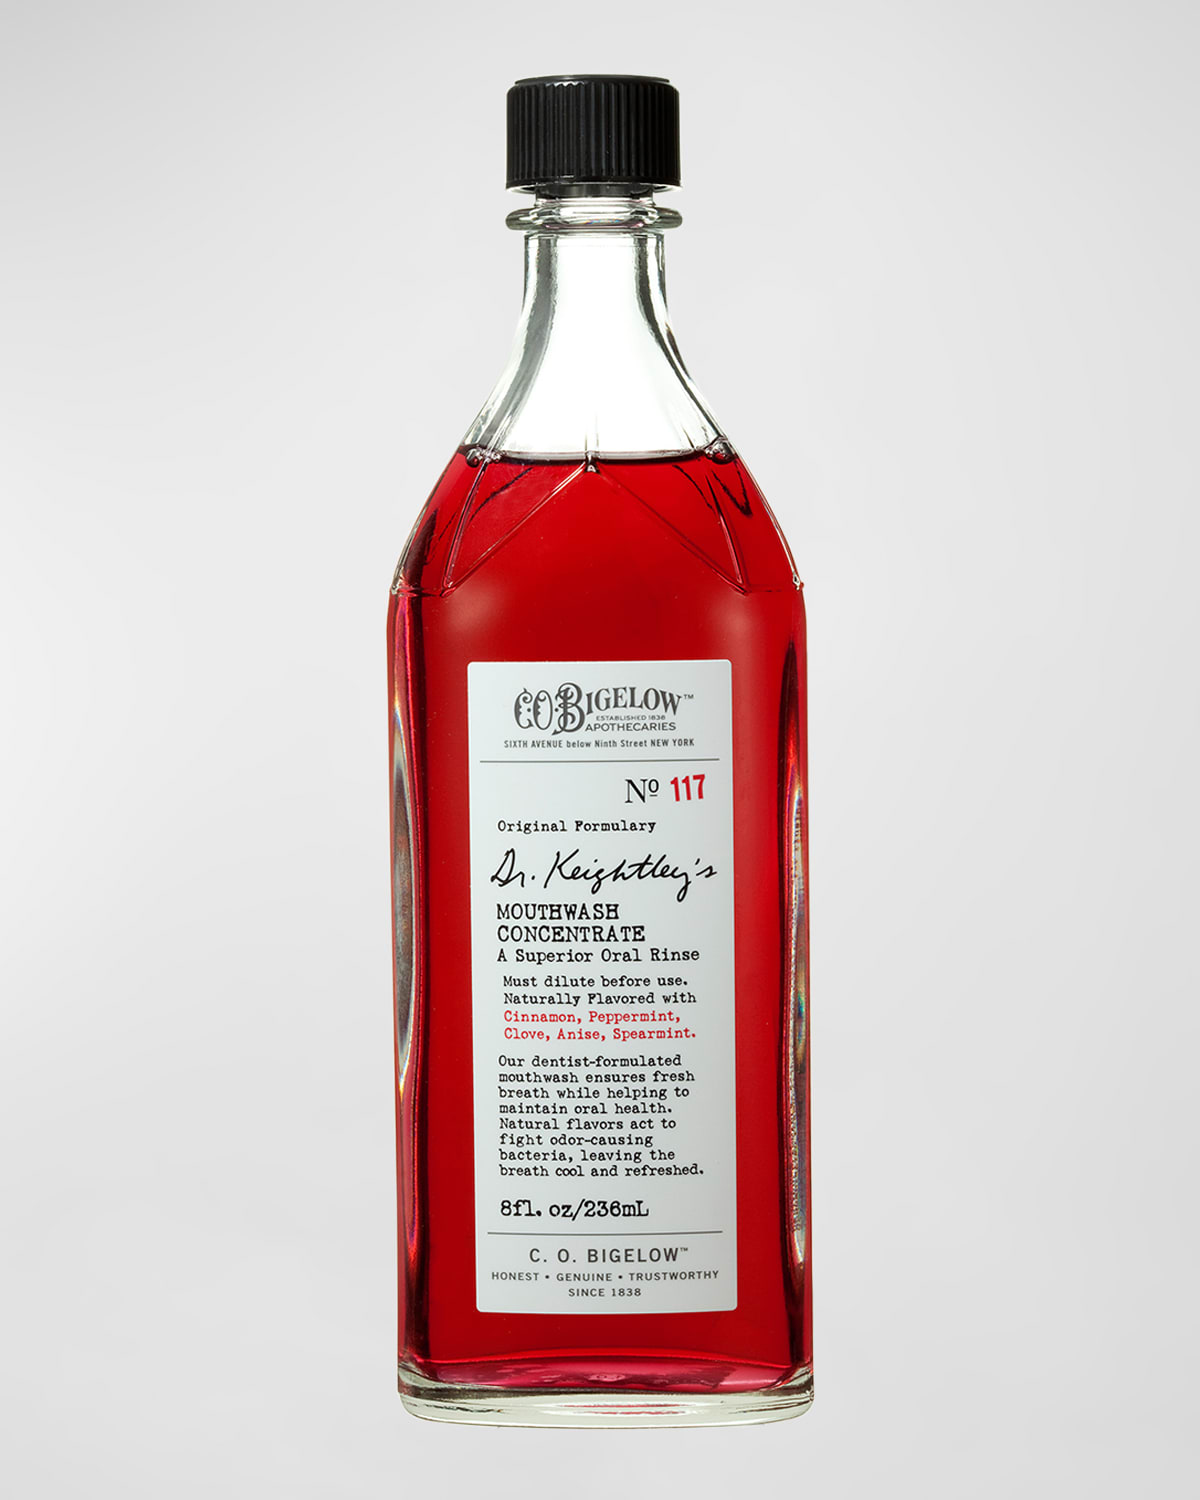 8 oz. Dr. Keightley's Mouthwash Concentrate